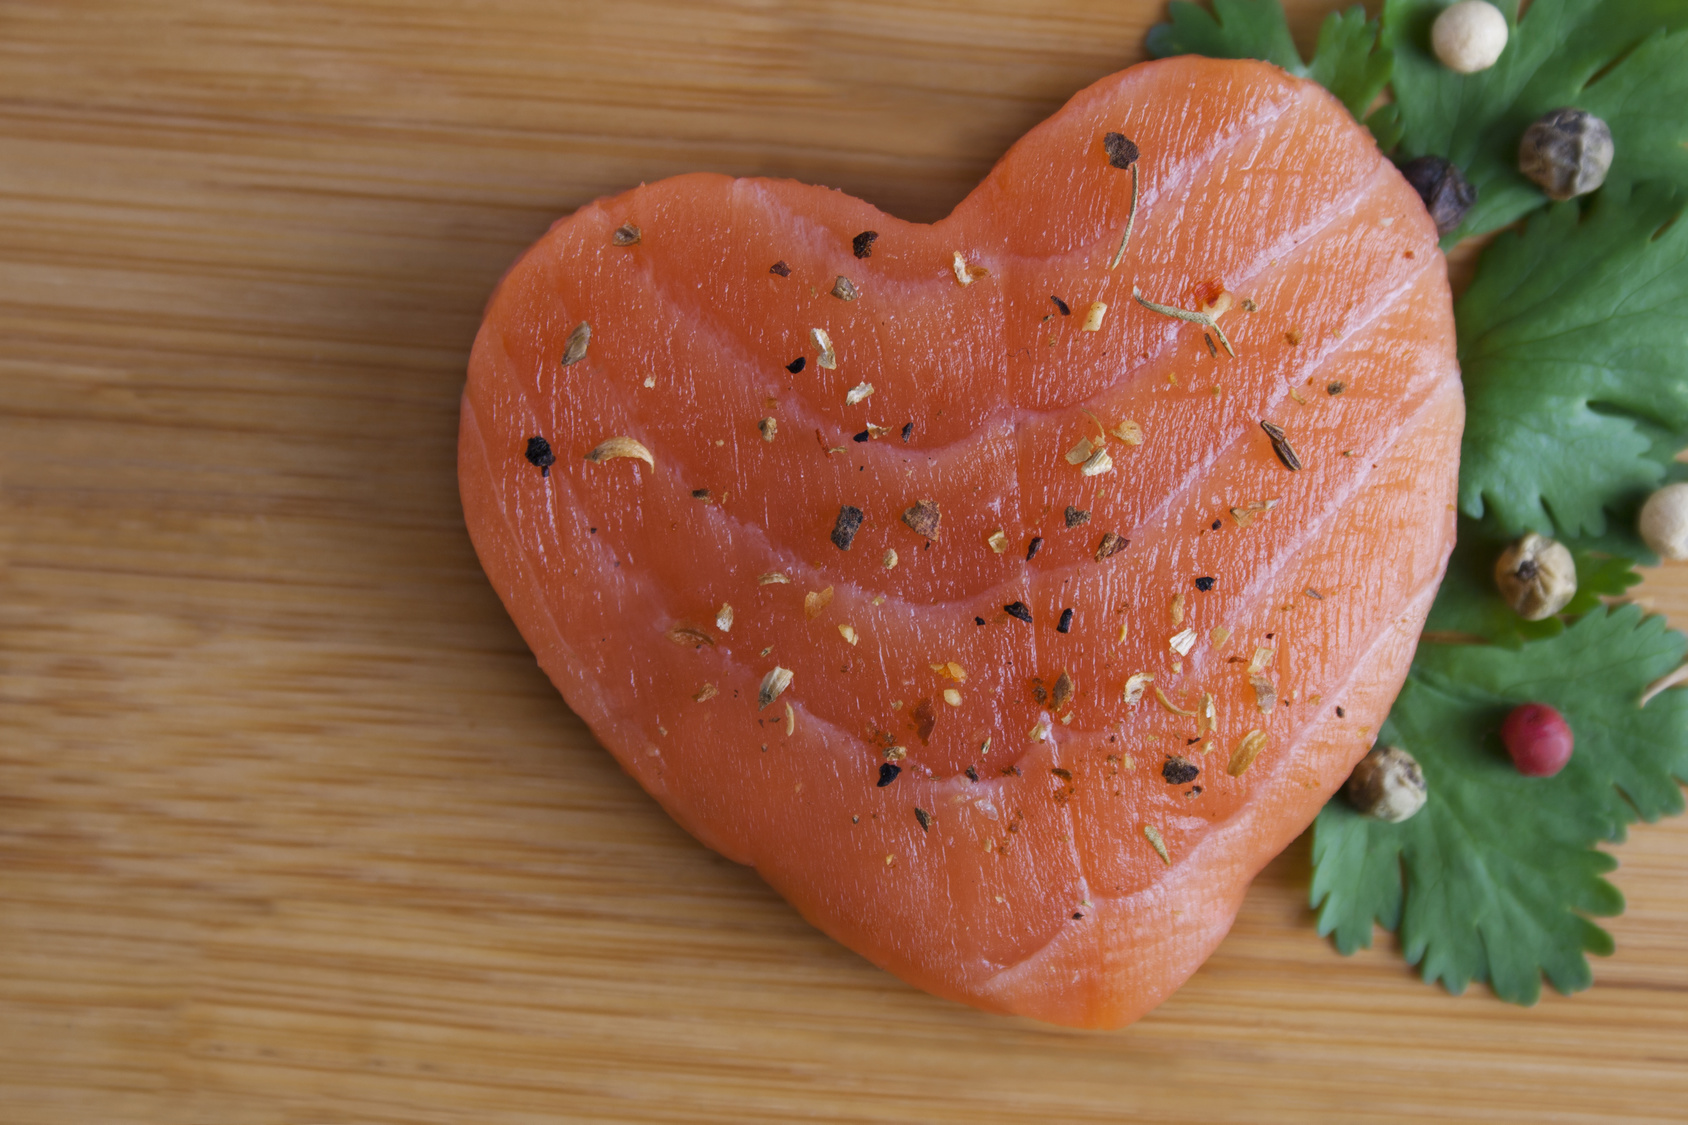 Heart shaped salmon with wooden backgroud